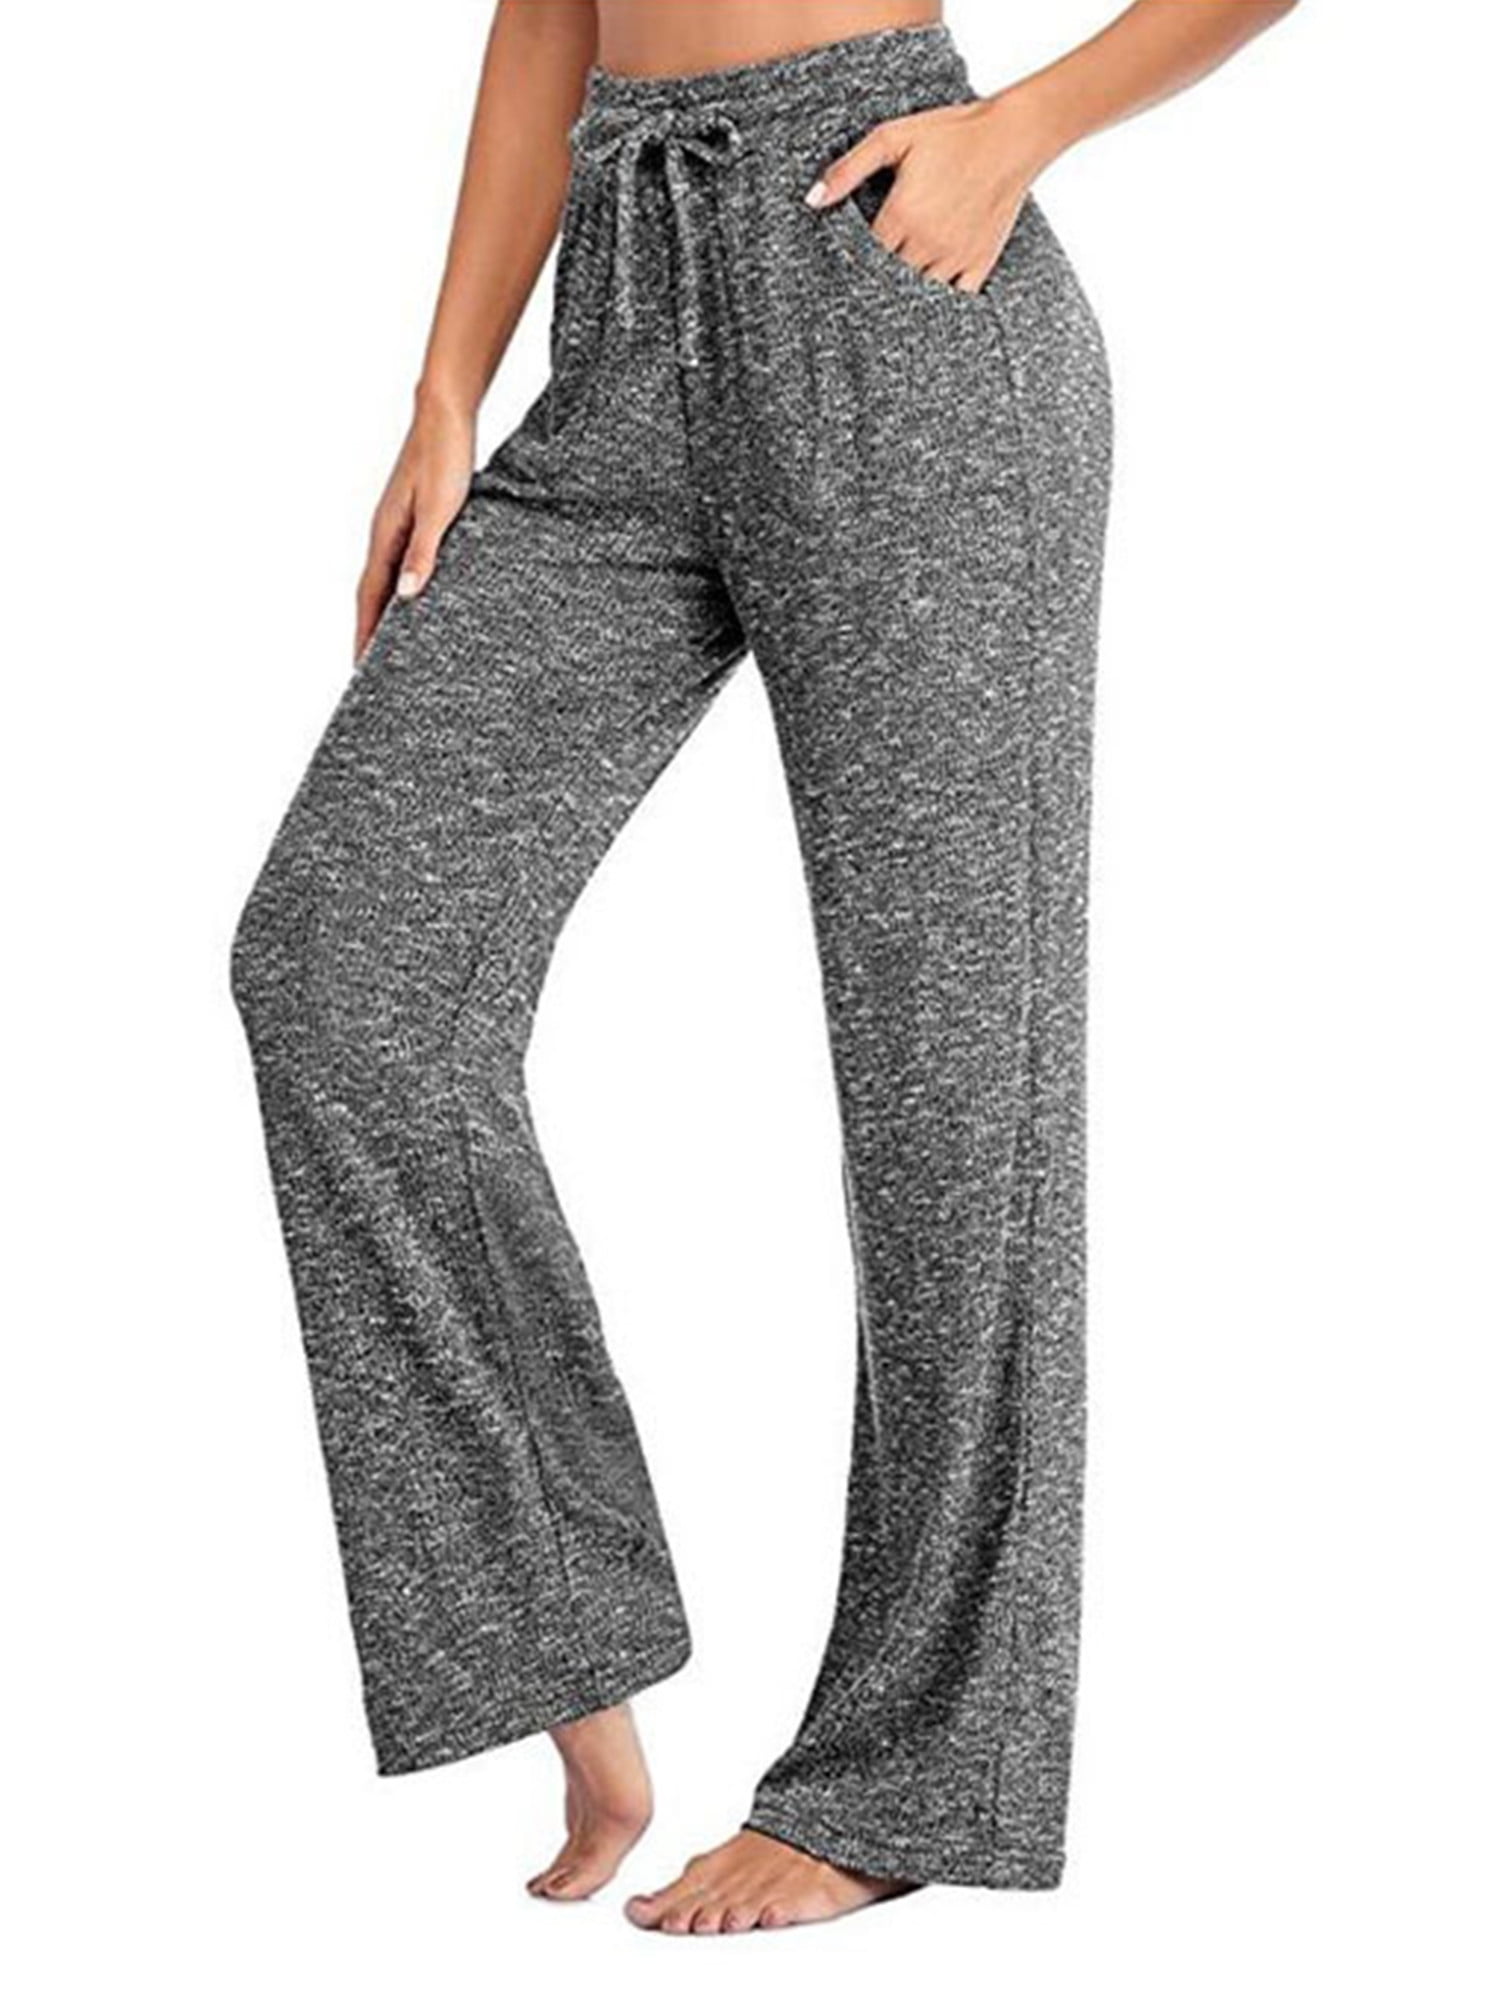 Sexy Dance Womens Ladies Flare Pajamas Pants Leisure Sleep Bootleg Bottoms  Drawstring Waist Stretchy Loose Long Lounge Pants Dry Fit Trousers 